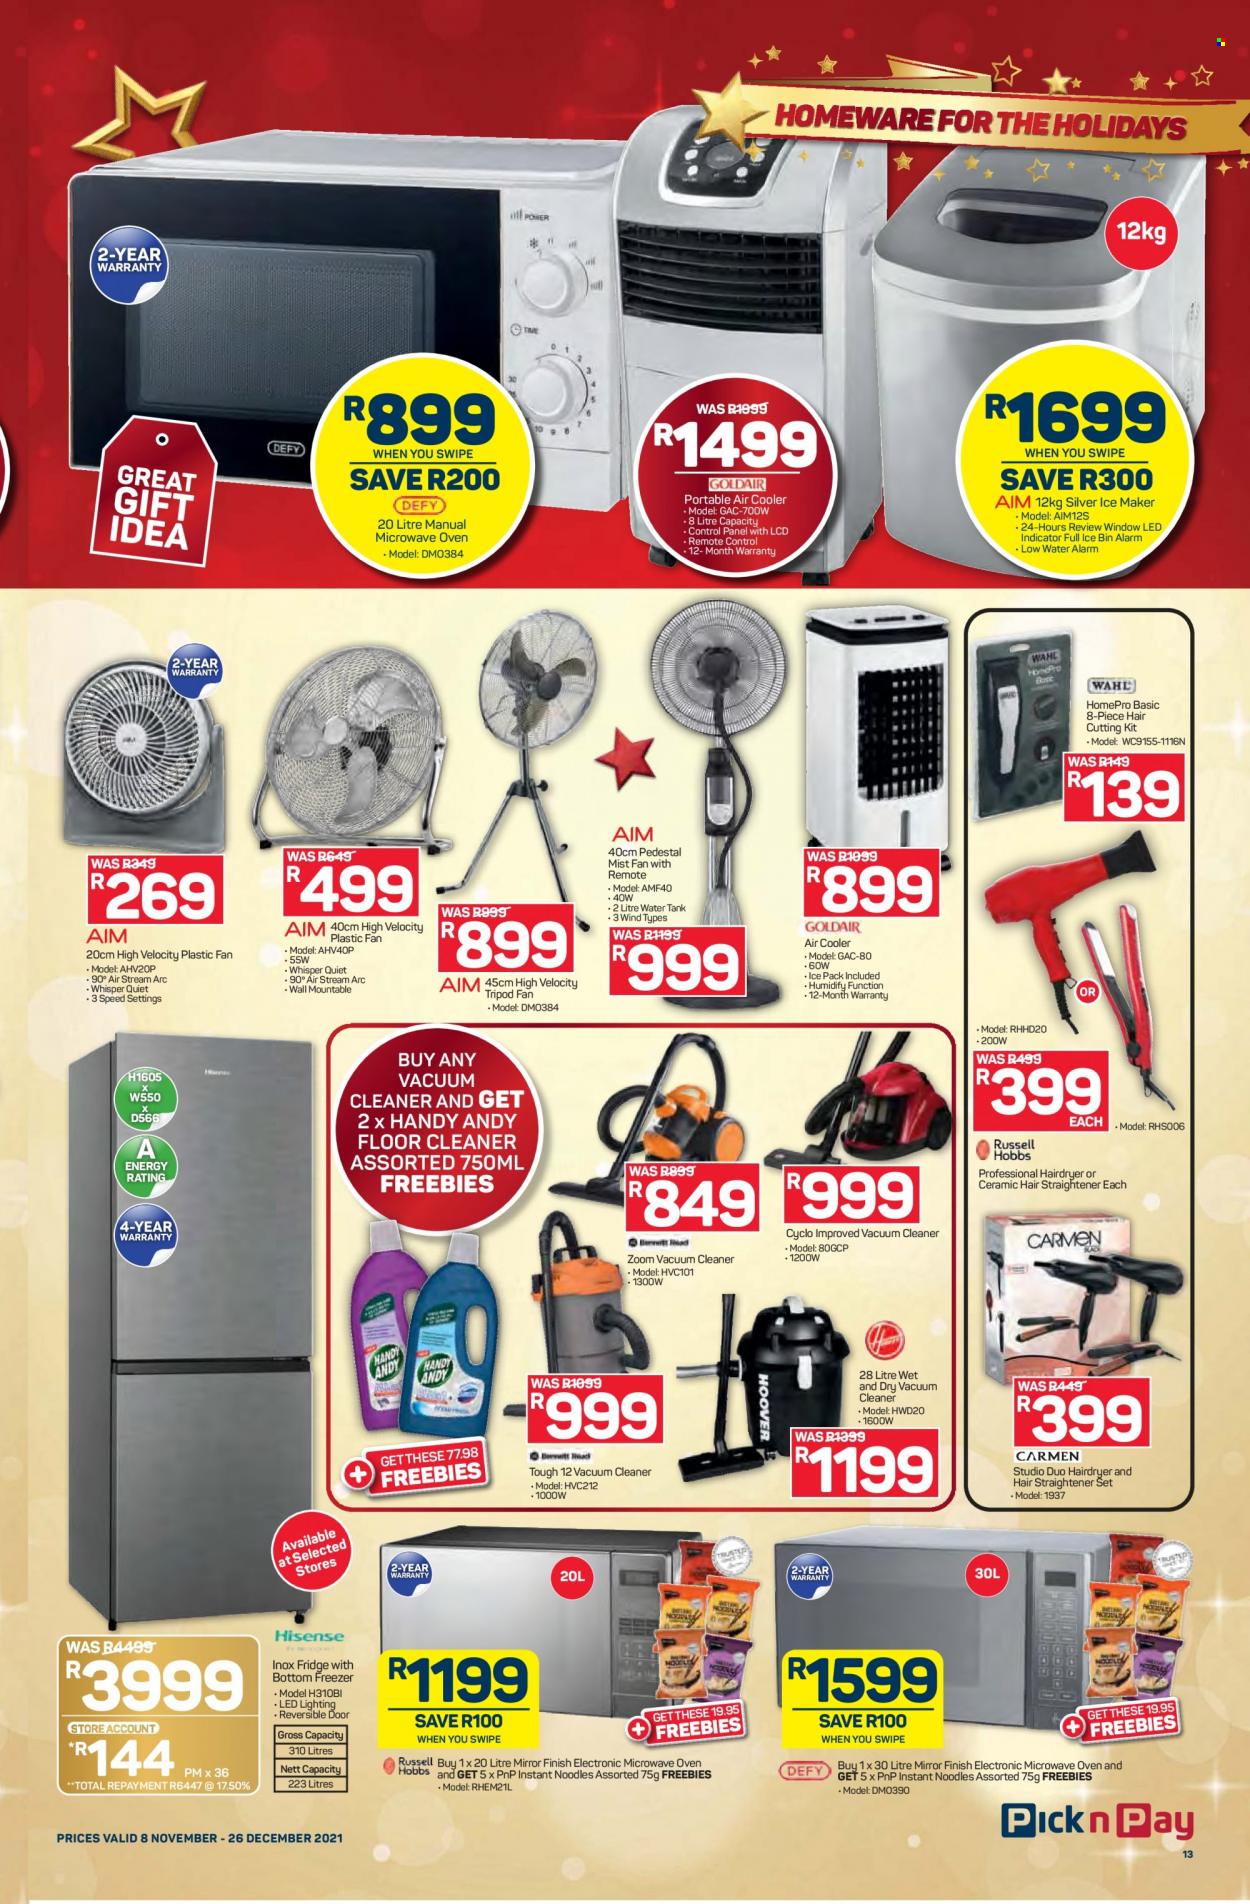 Pick n Pay specials - 11.08.2021 - 12.26.2021. 